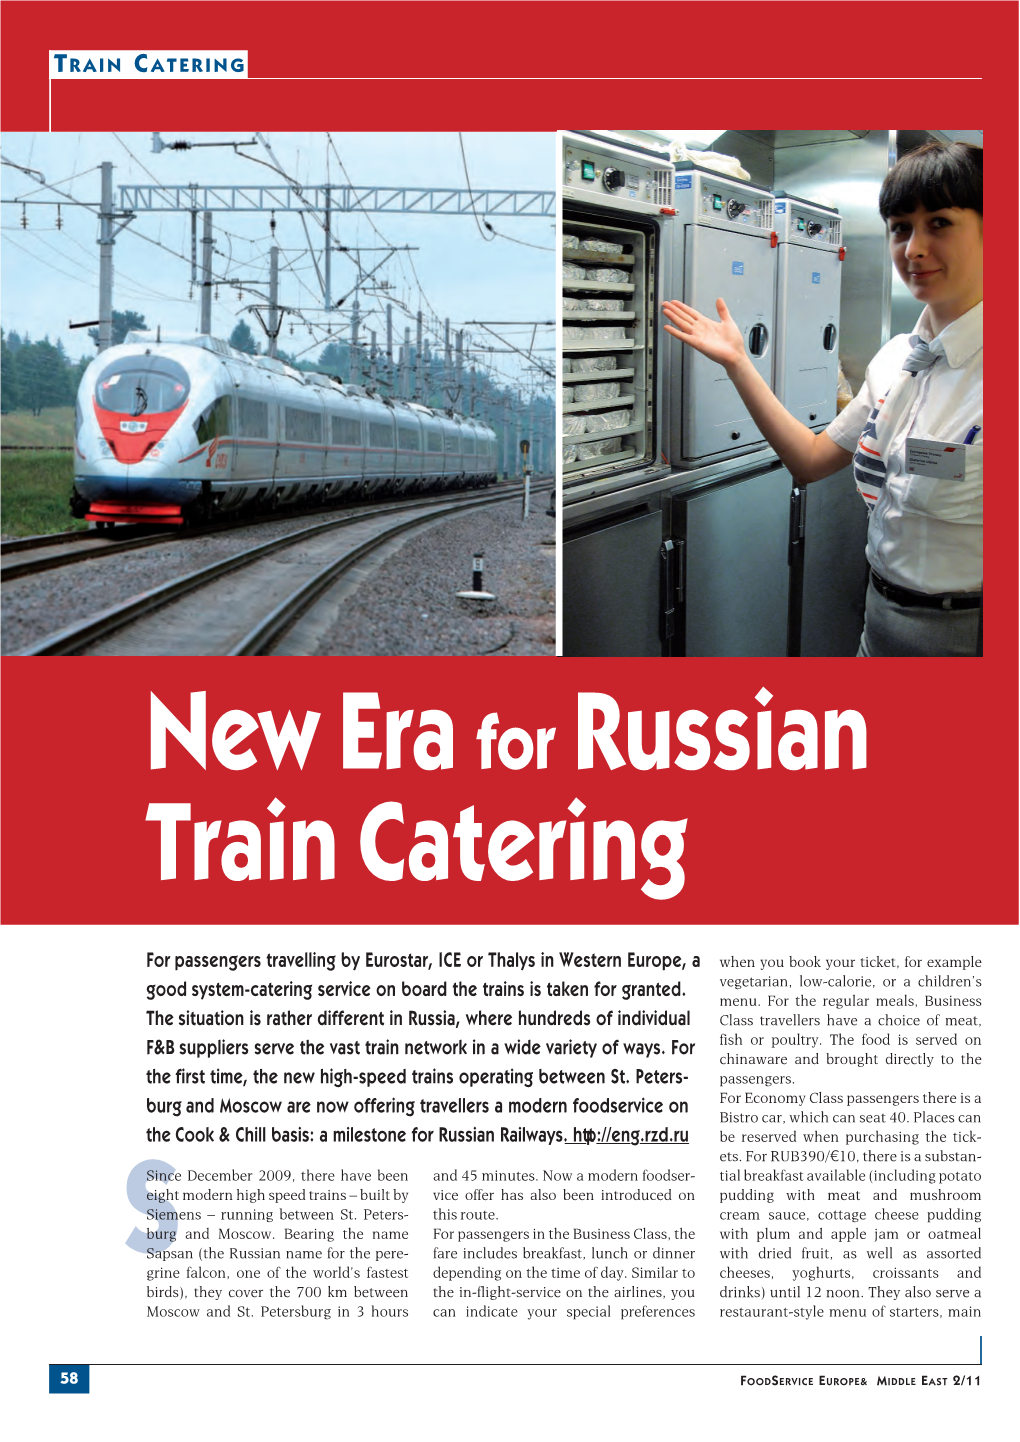 New Era for Russian Train Catering